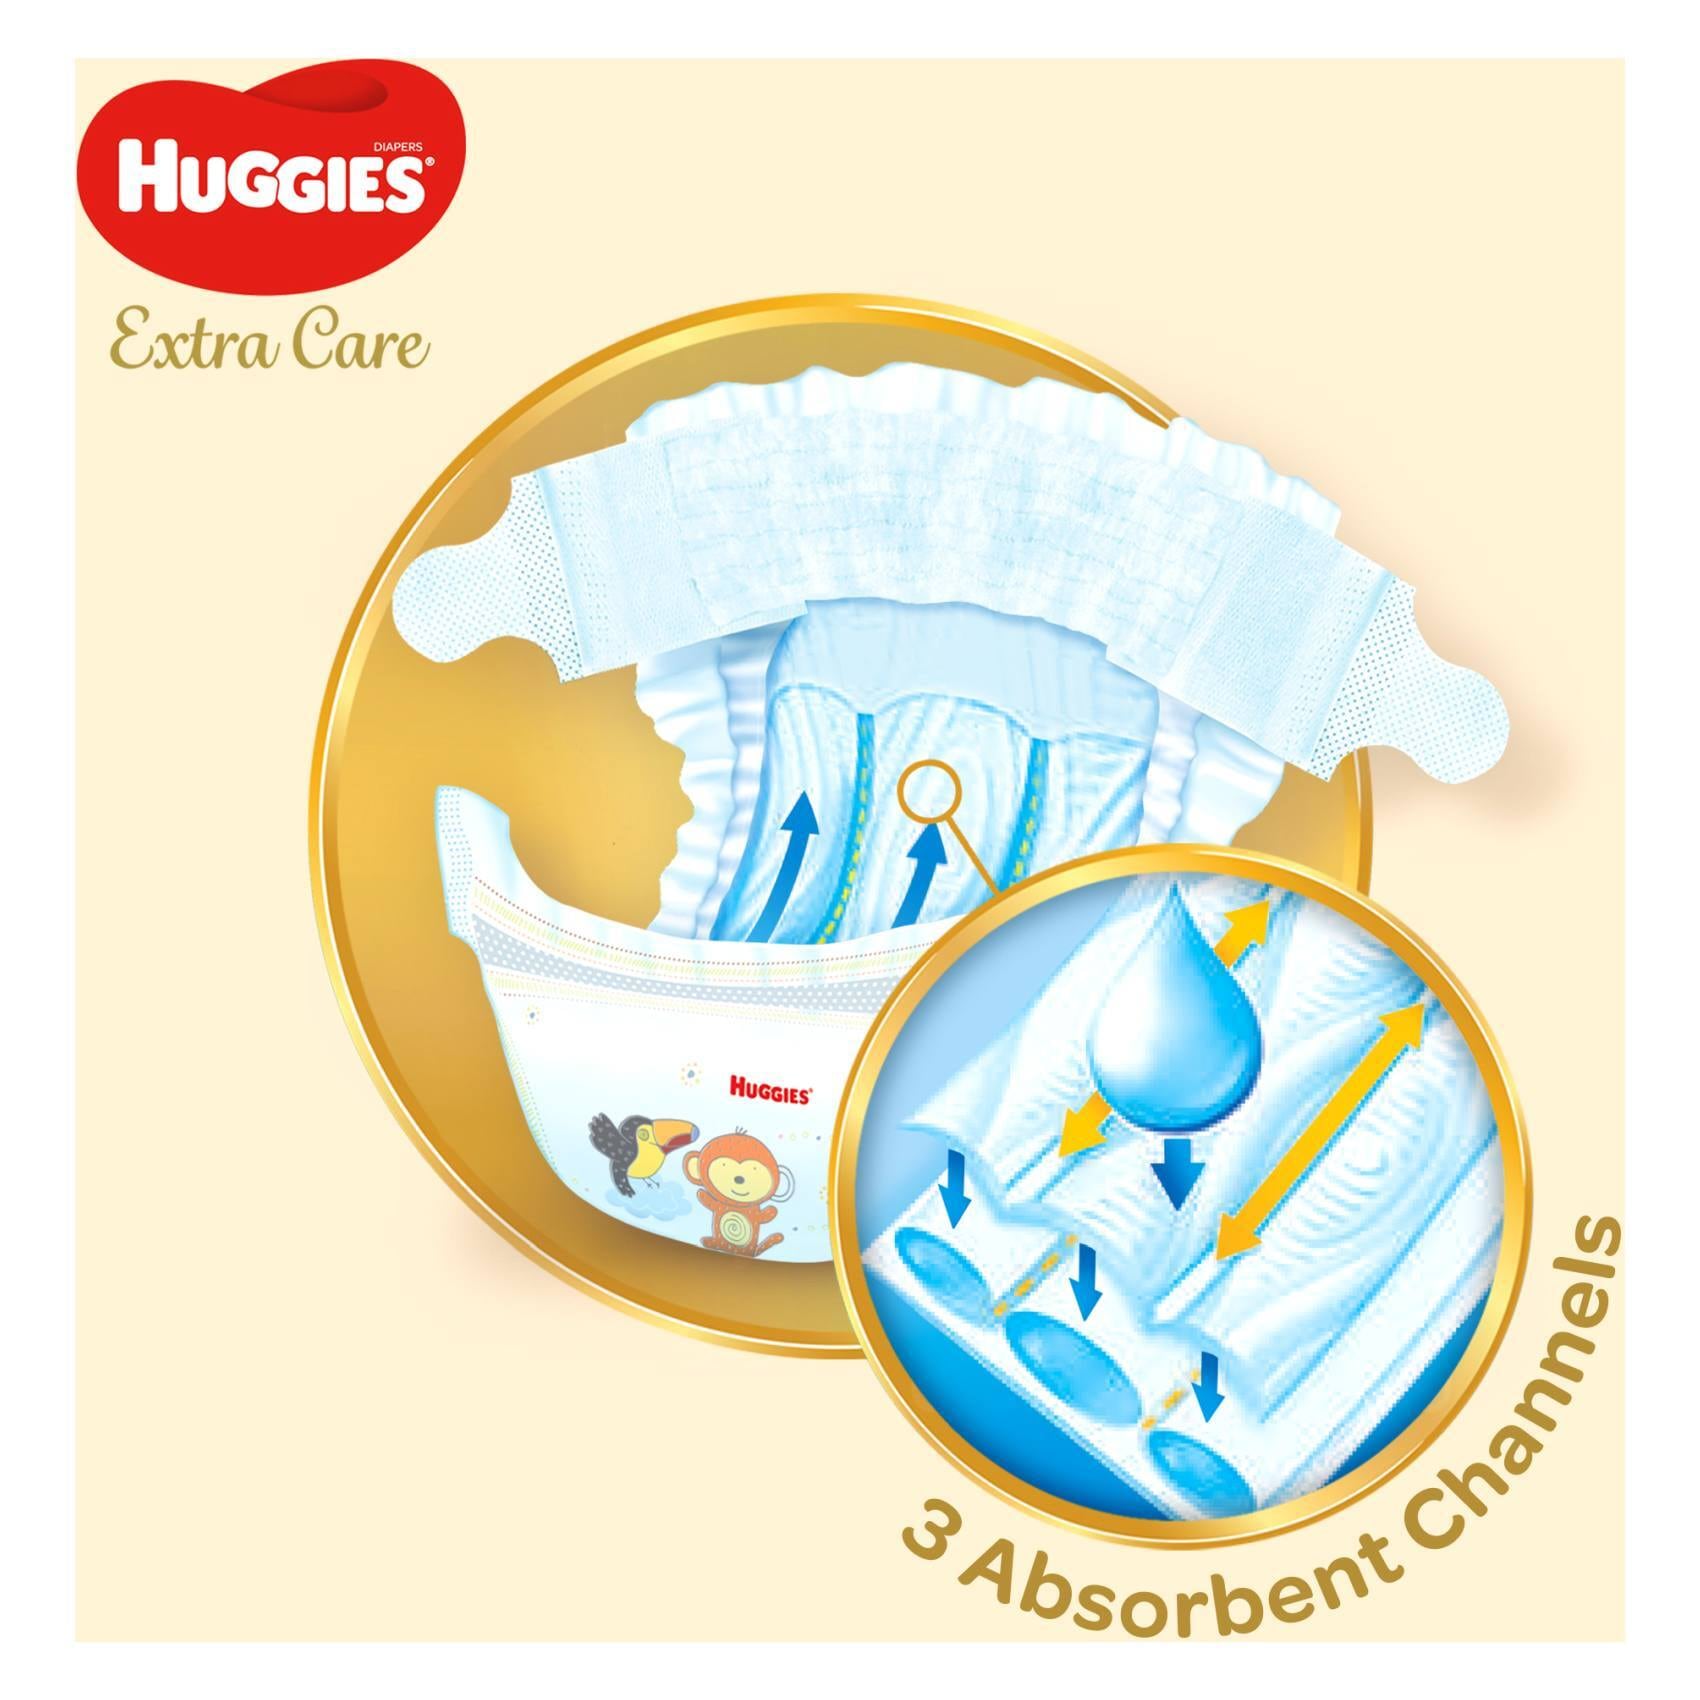 HUGGIES Ultra Comfort Diapers, Size 4+, Jumbo Pack, 10-16 kg, 204 Diapers :  Buy Online at Best Price in KSA - Souq is now : Baby Products